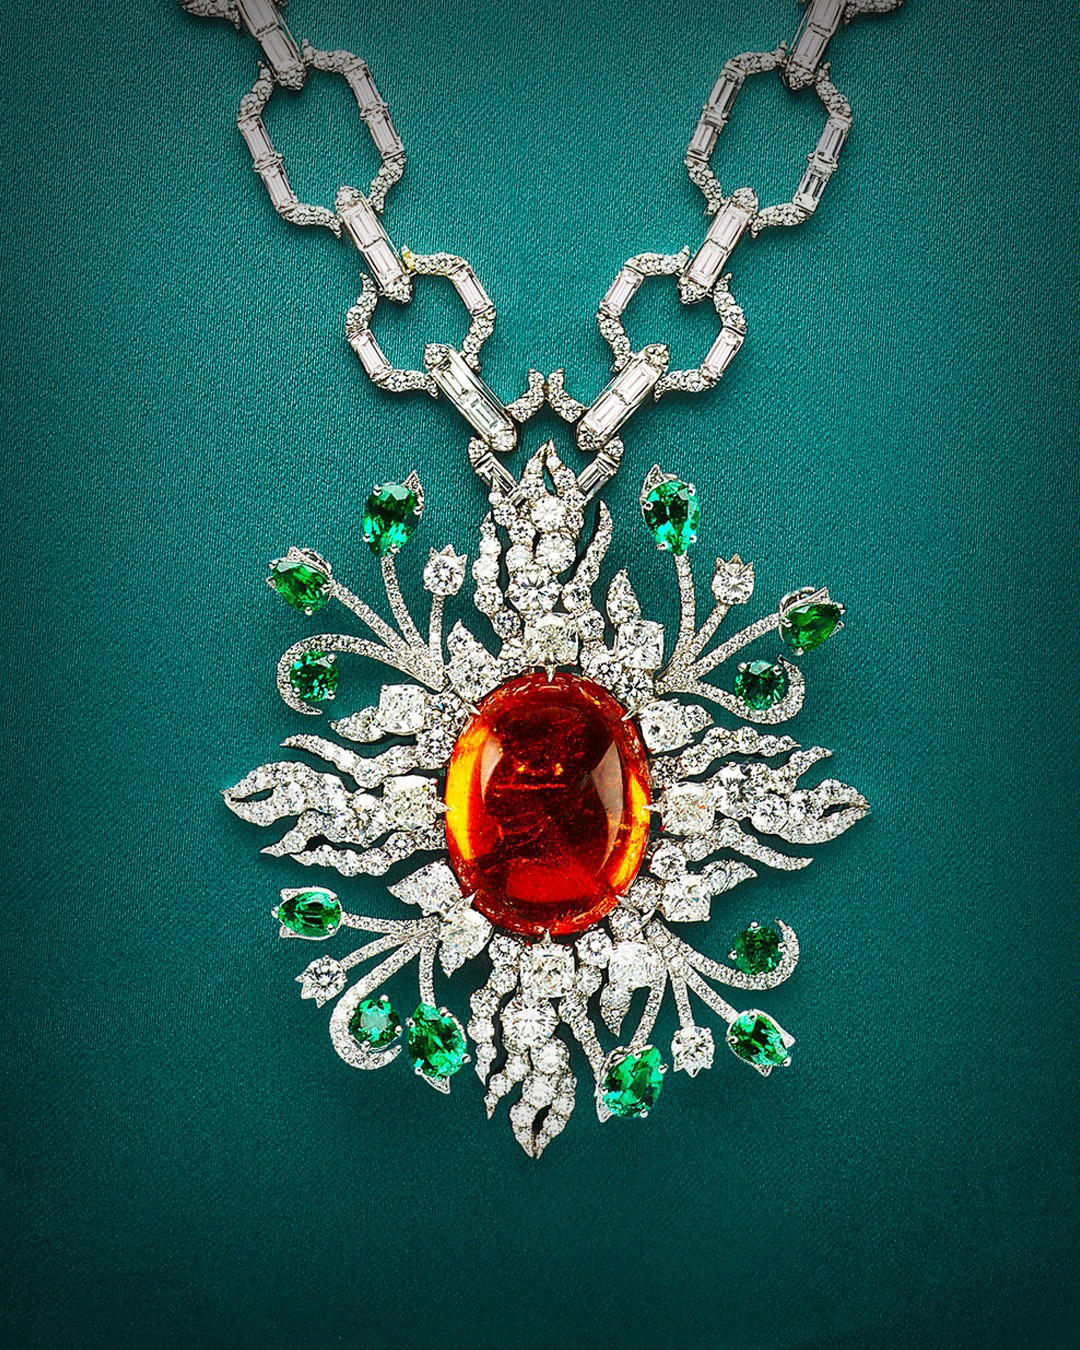 image  1 Meaning ‘Garden of Delights’ in Latin, the Hortus Deliciarum High Jewelry collection sees the House’